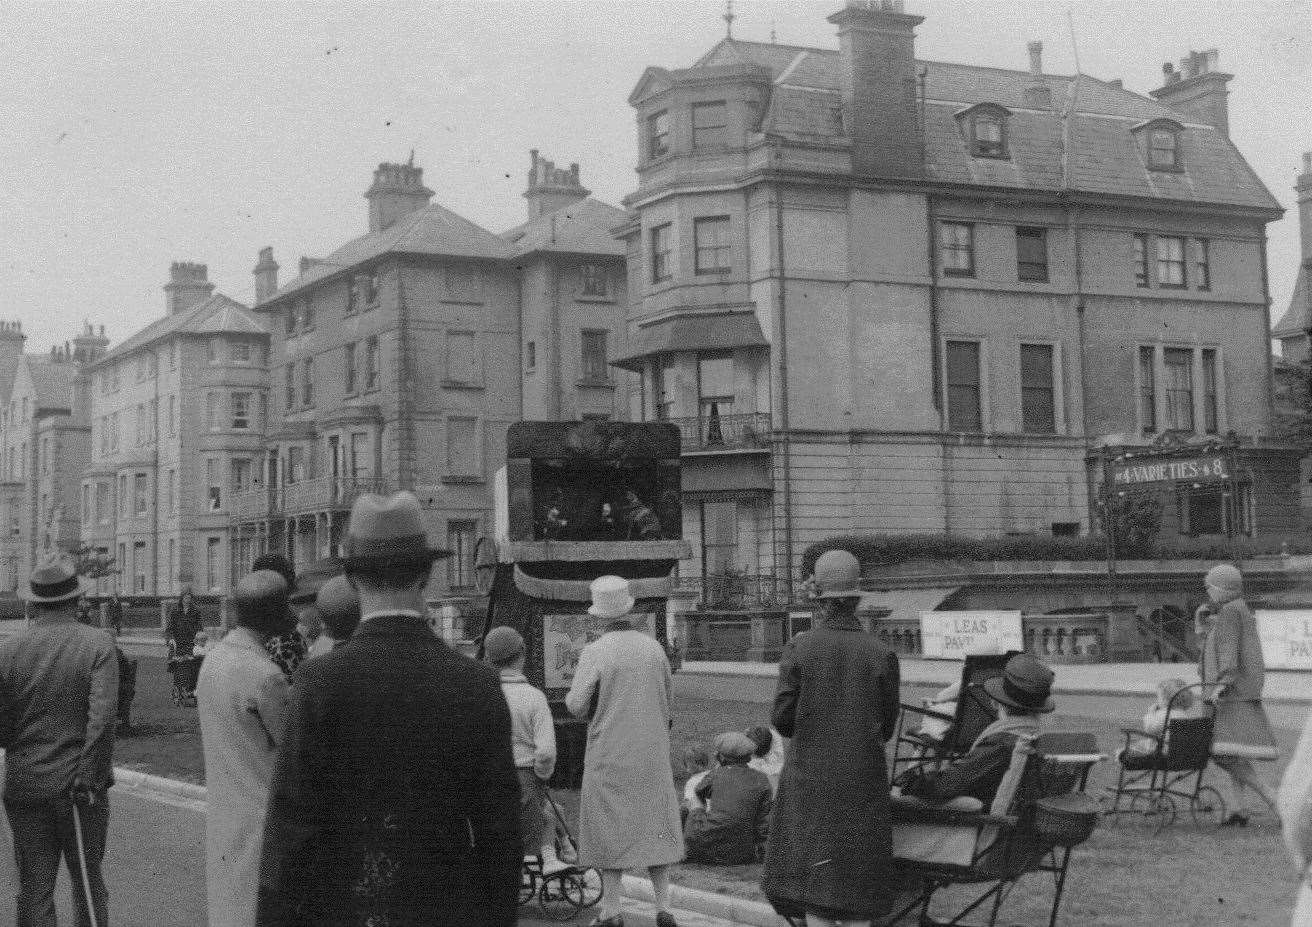 The Leas Pavilion, to the right of this photograph, seen during its heyday. Picture: Alan Taylor